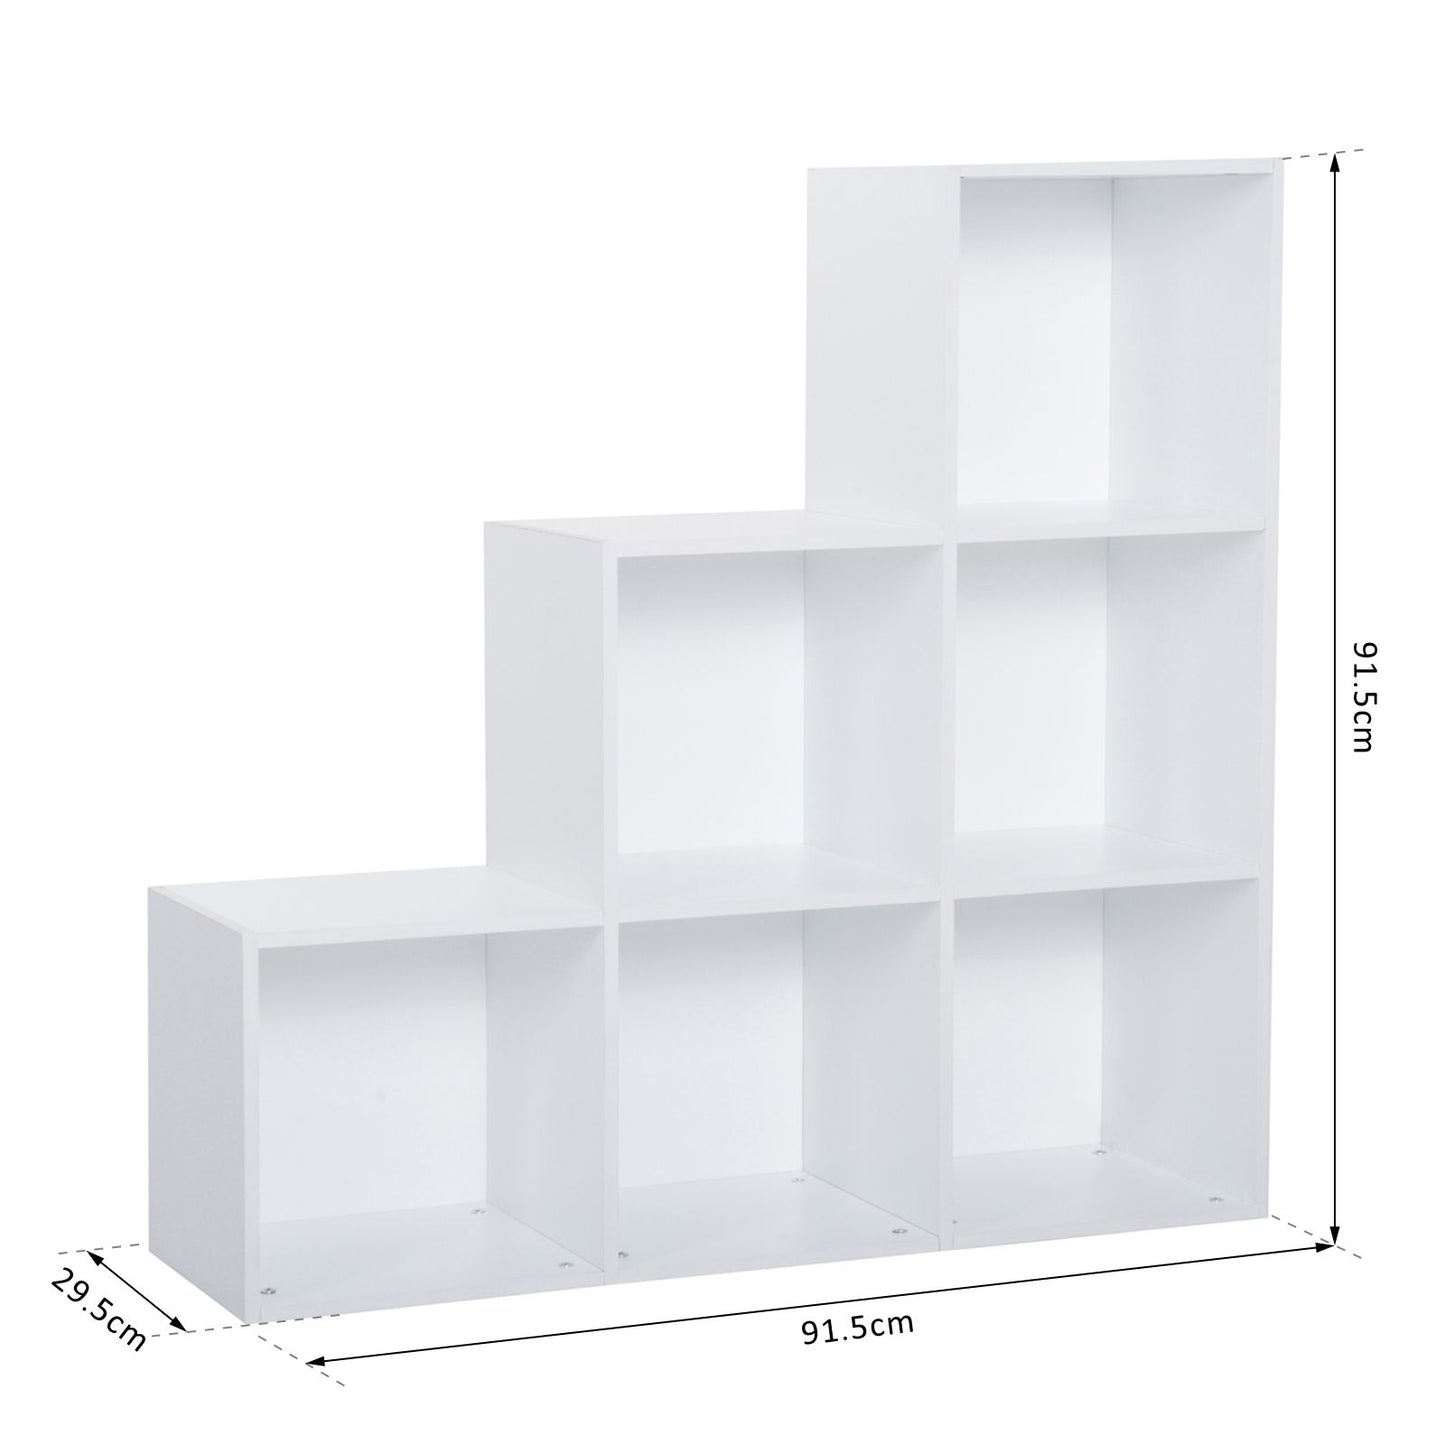 HOMCOM 6 Cubes 3-Tier Shelving Cabinet, Particle Board-White